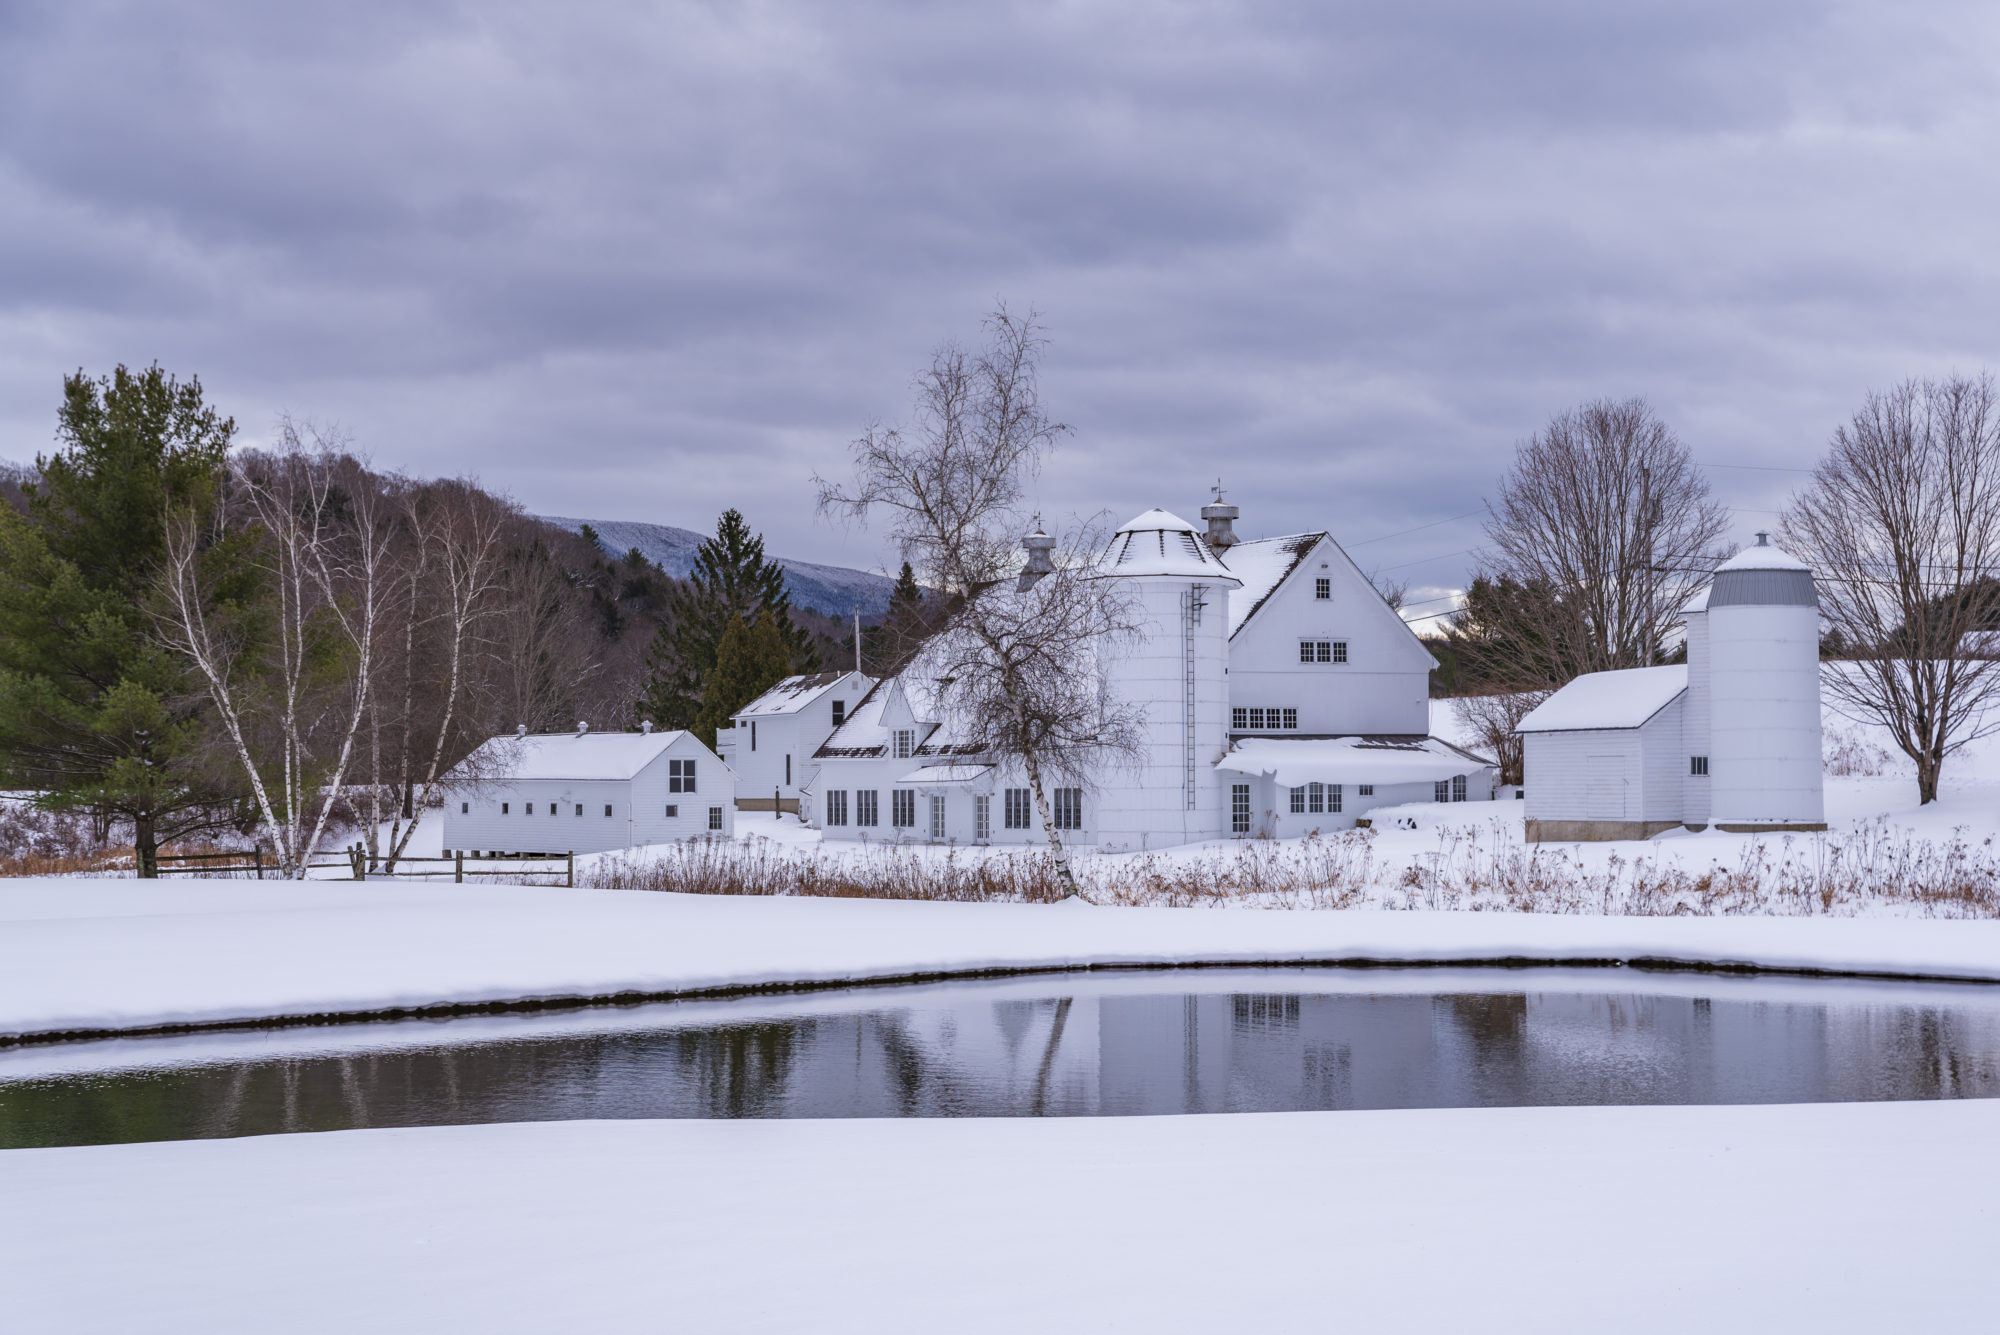 Vermont Landscape photography tips featured on top New England travel photography blogger, Shannon Shipman.